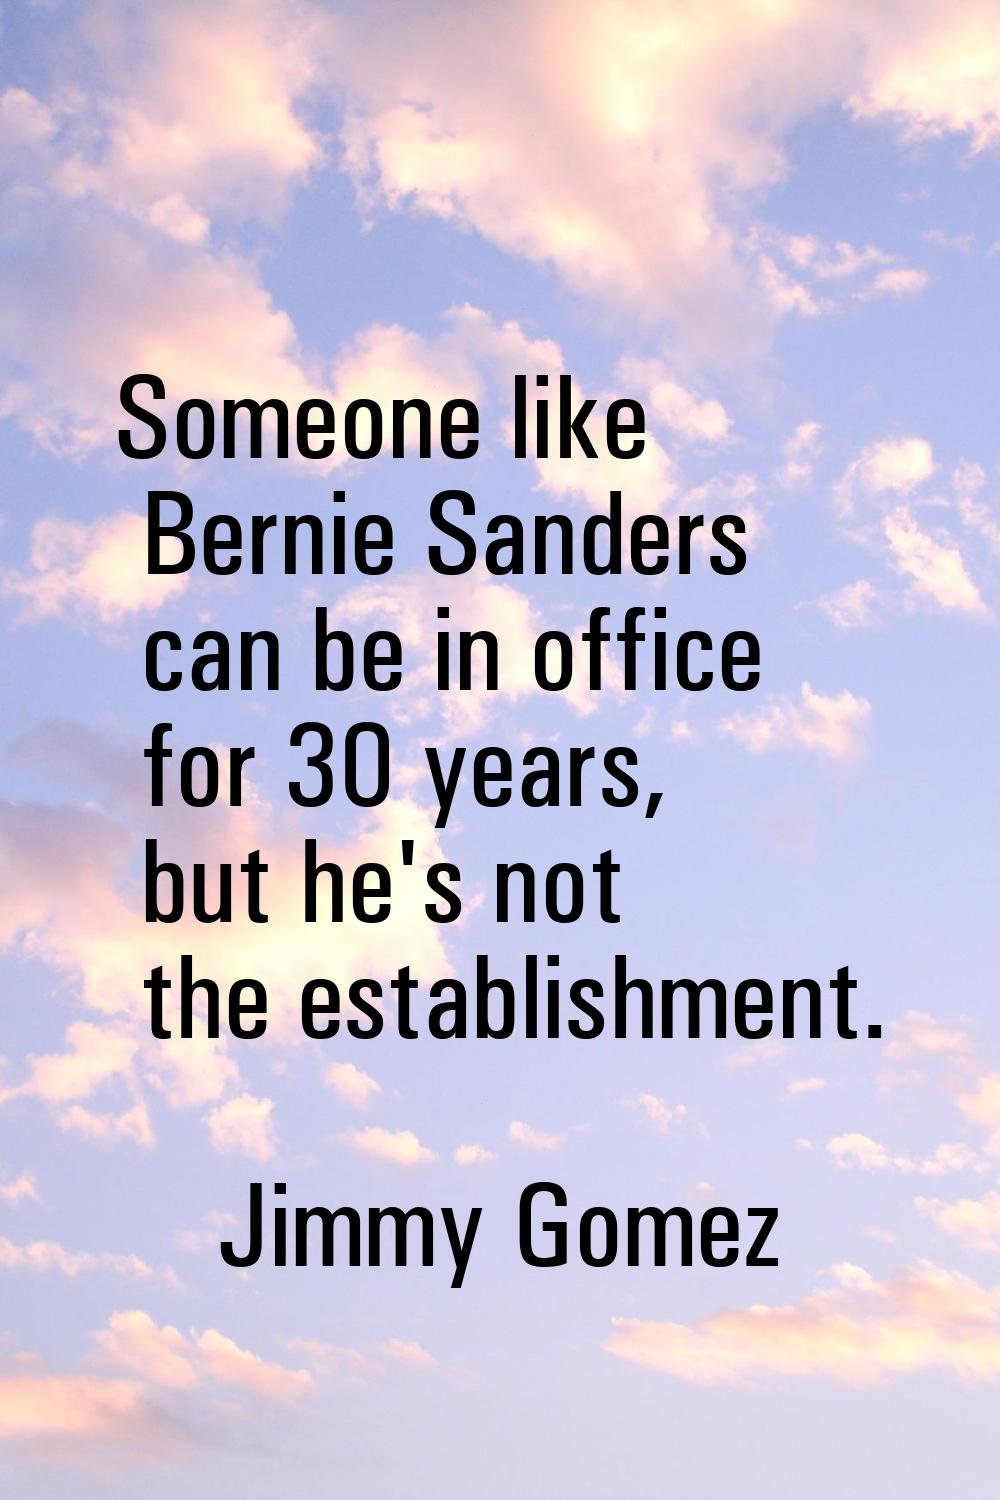 Someone like Bernie Sanders can be in office for 30 years, but he's not the establishment.